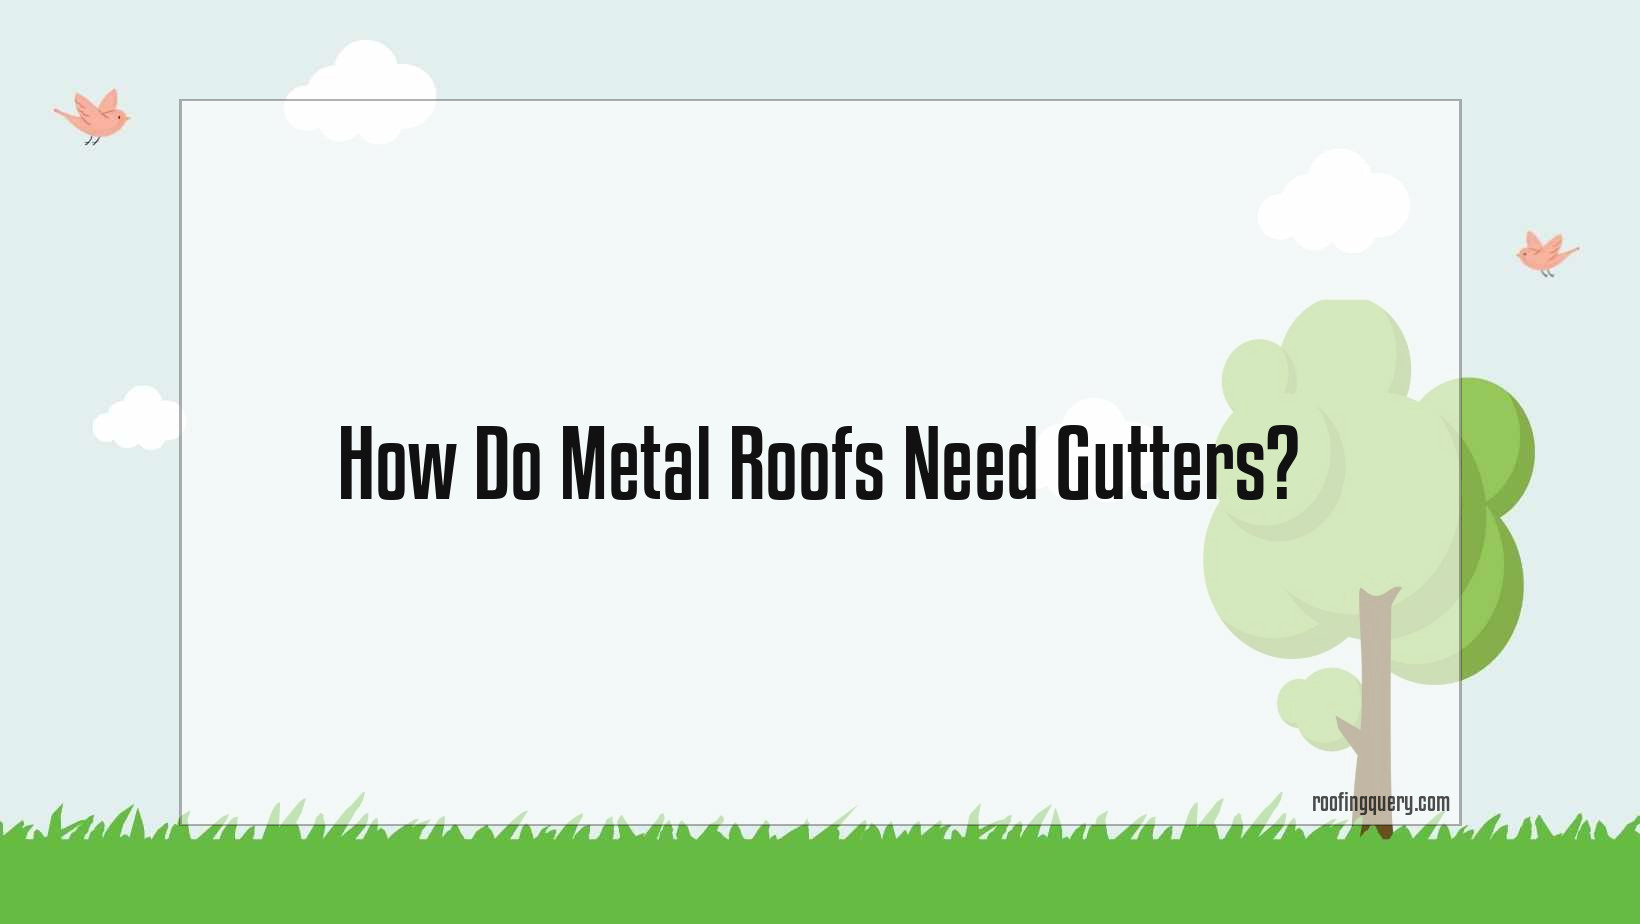 Do Metal Roofs Need Gutters